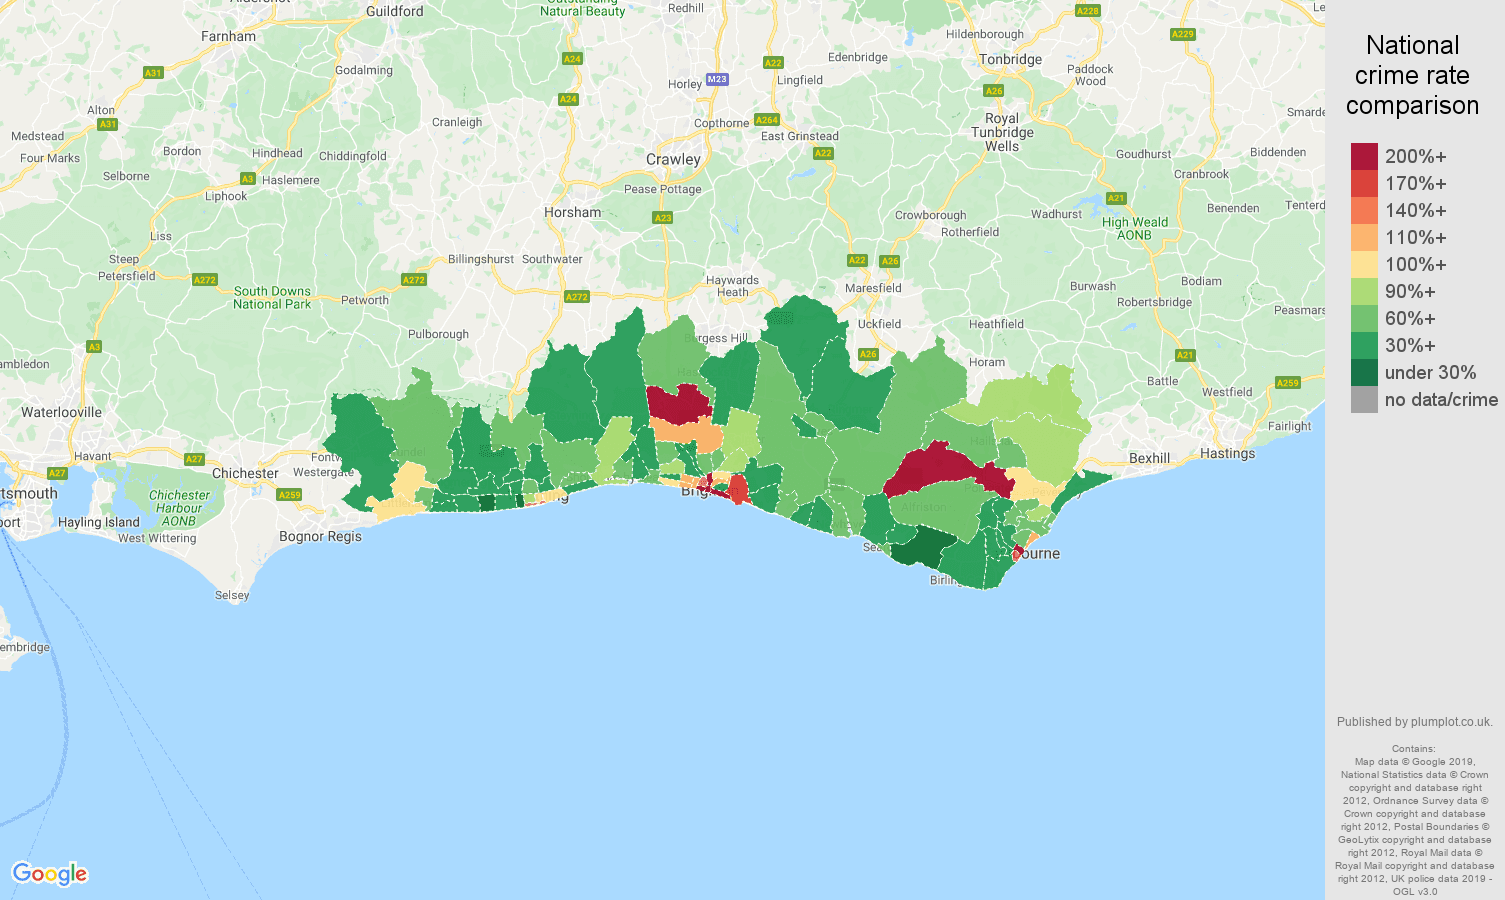 Brighton other theft crime rate comparison map